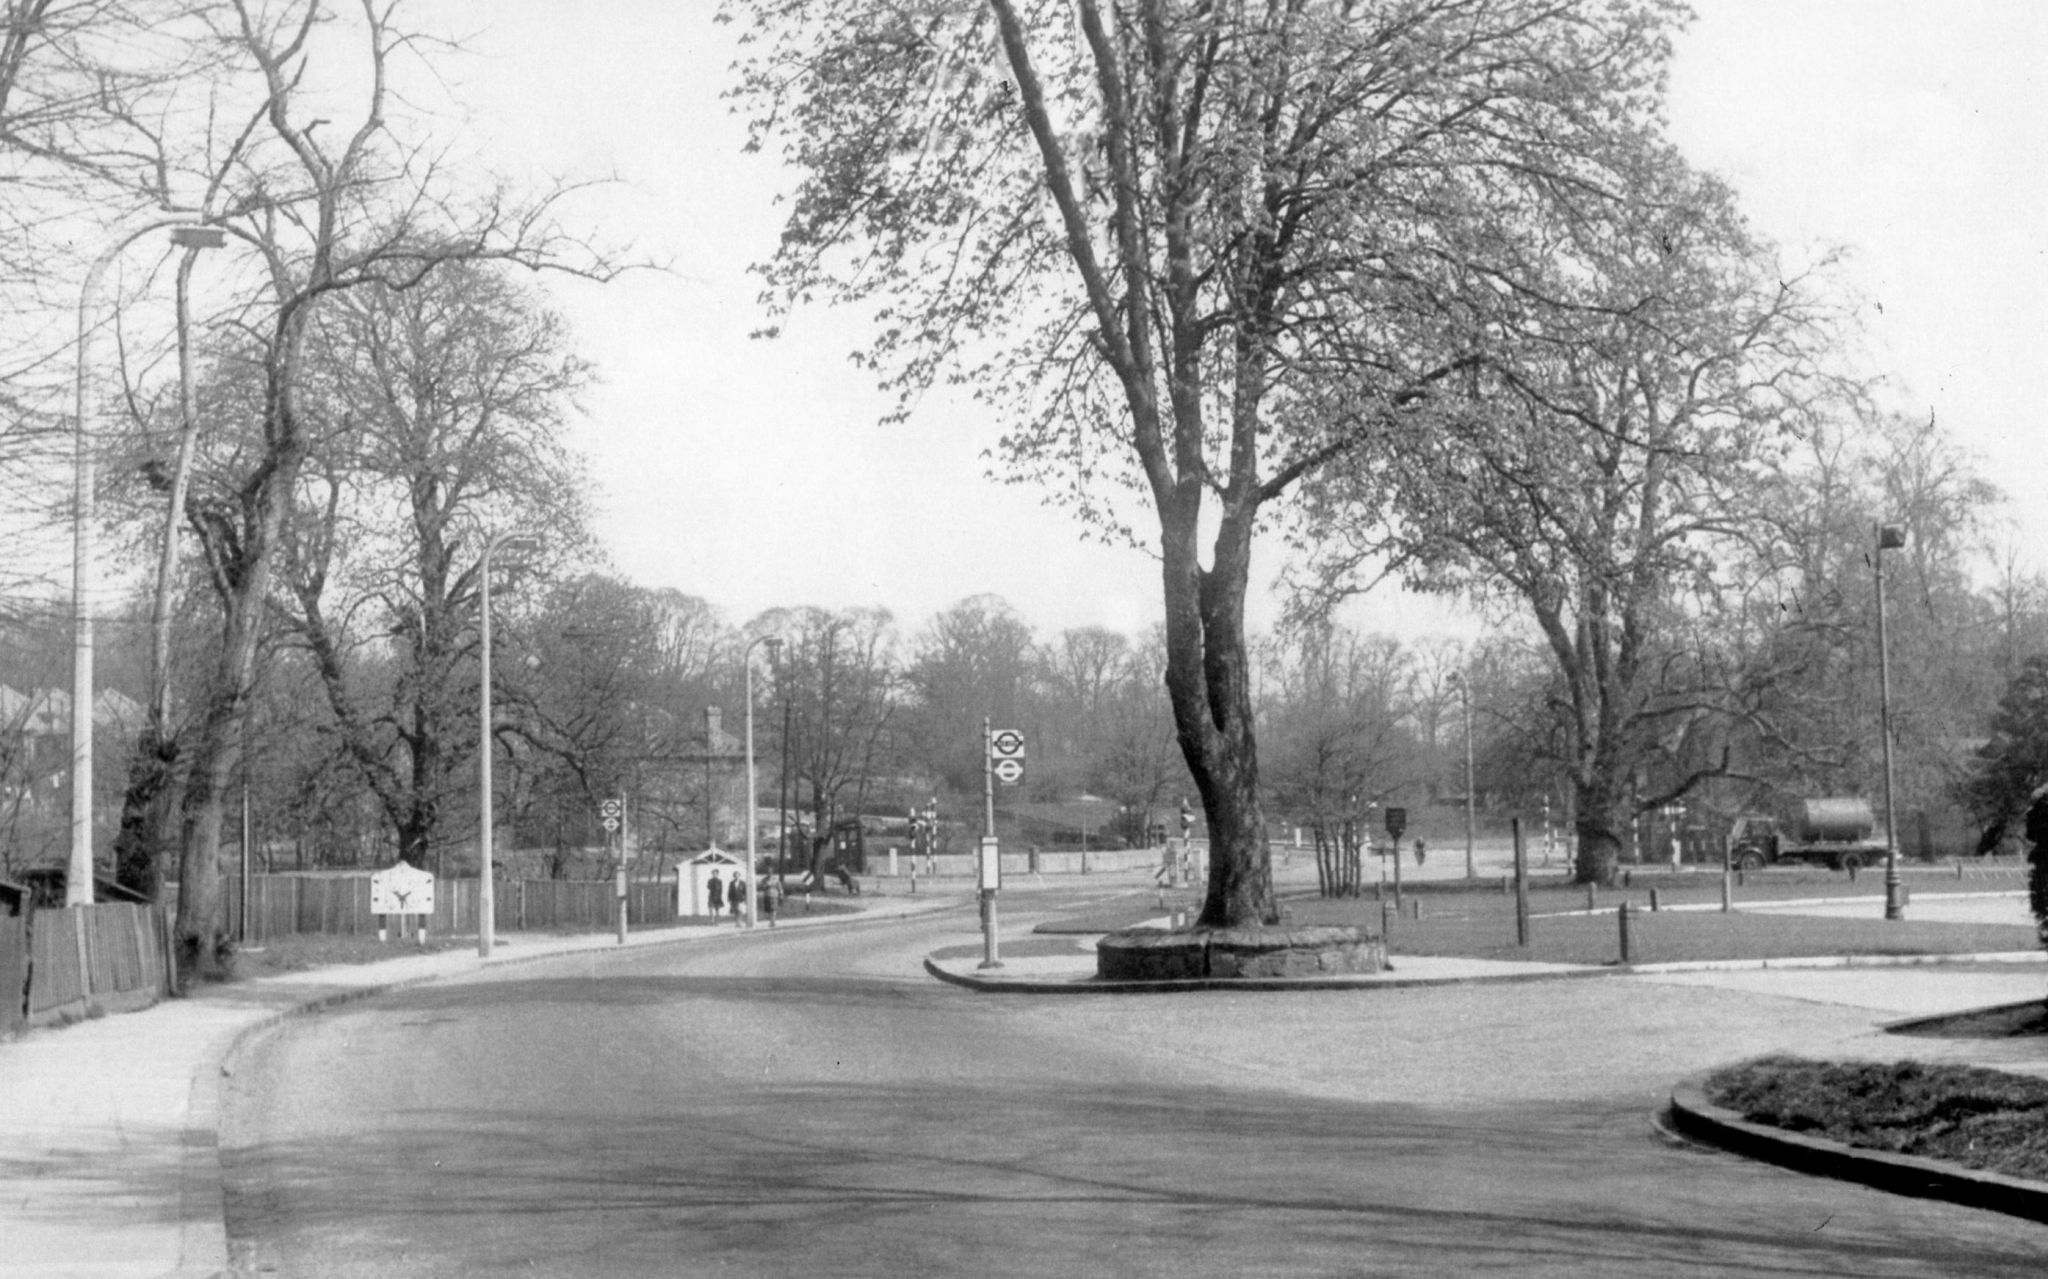 R35 junction of Rochester Way and Bourne Road, Bexley (c1955) (Hi-Res).jpg